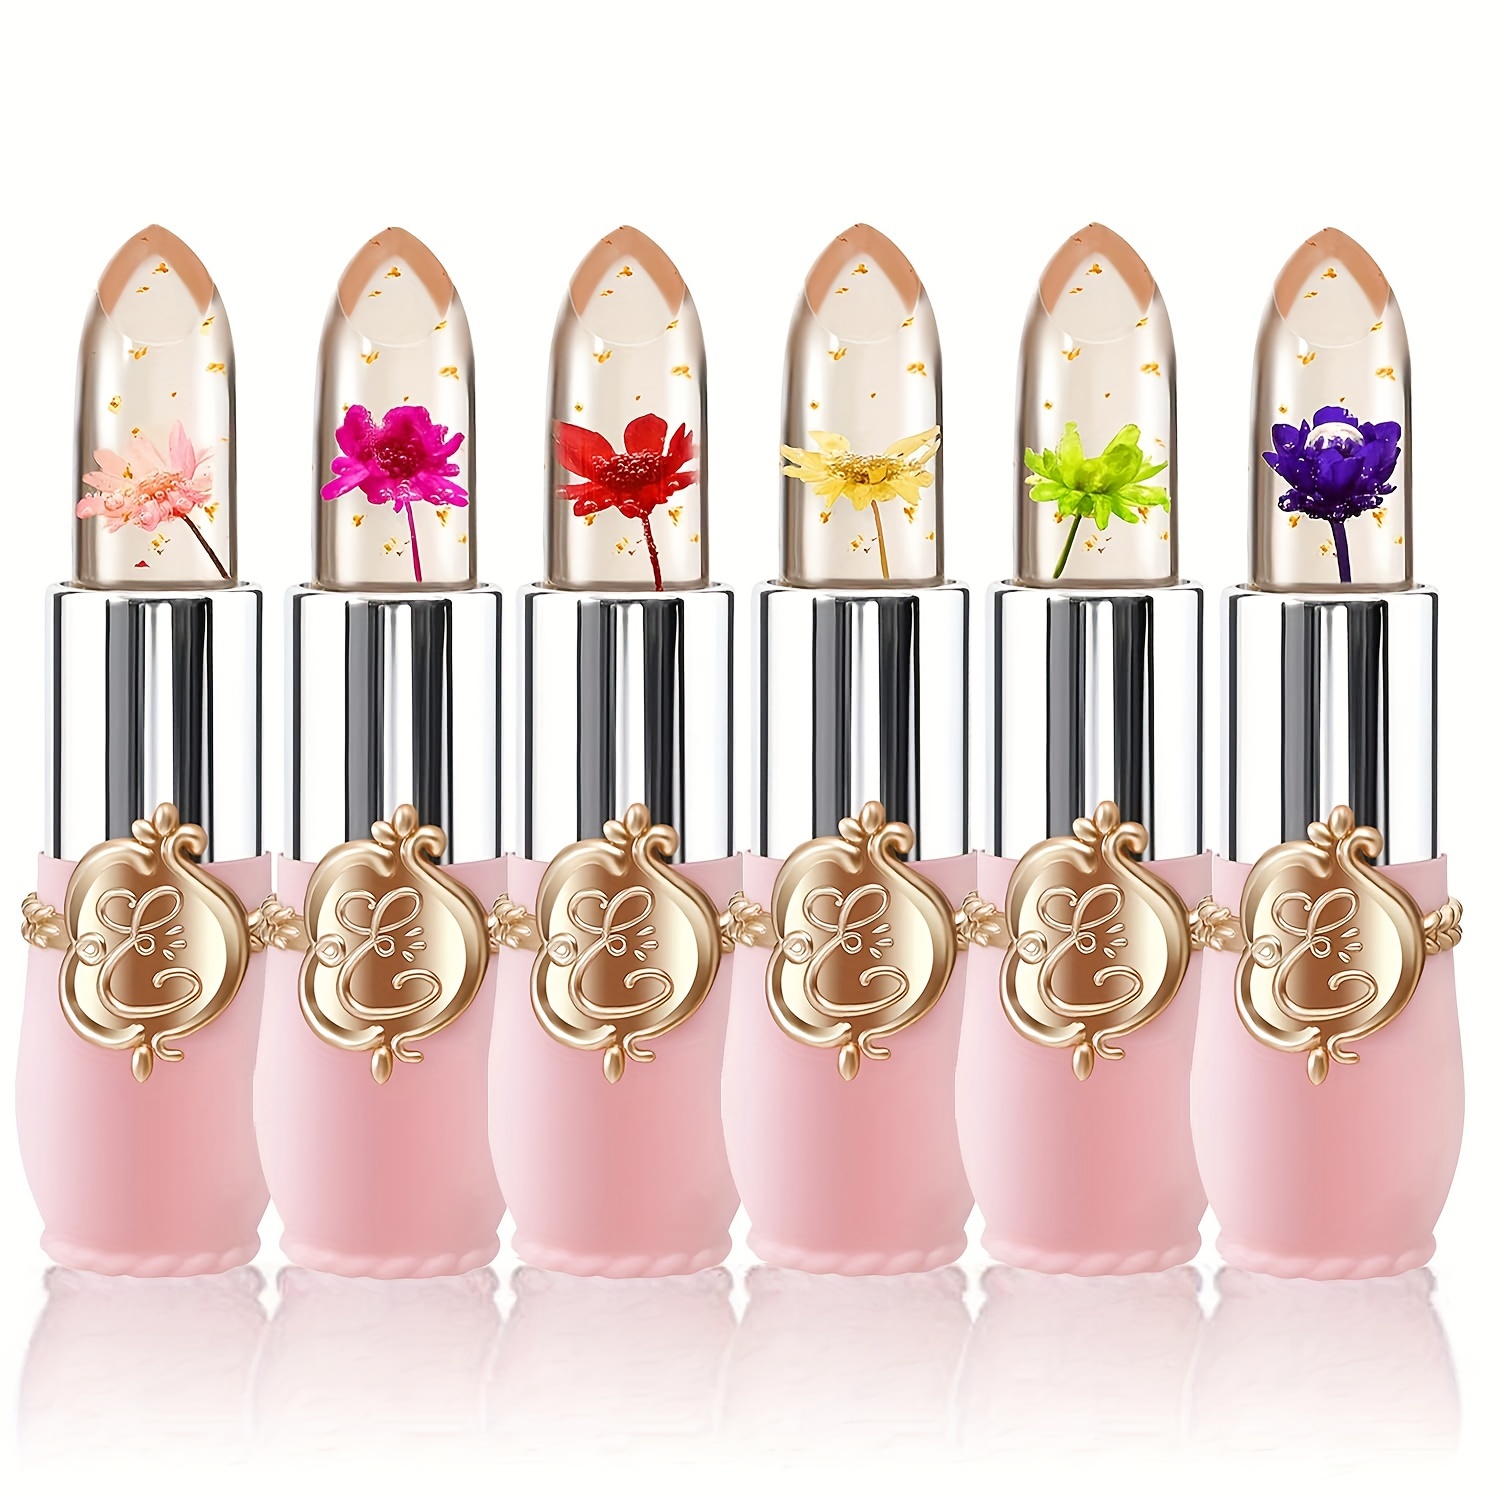 

6-pc Crystal Flower Jelly Lipstick Gift Set, Long-lasting Moisture Rich Lip Balm, Magic Temperature Color Changing Lip Care Cosmetics With Elegant Design, Gifts For Women